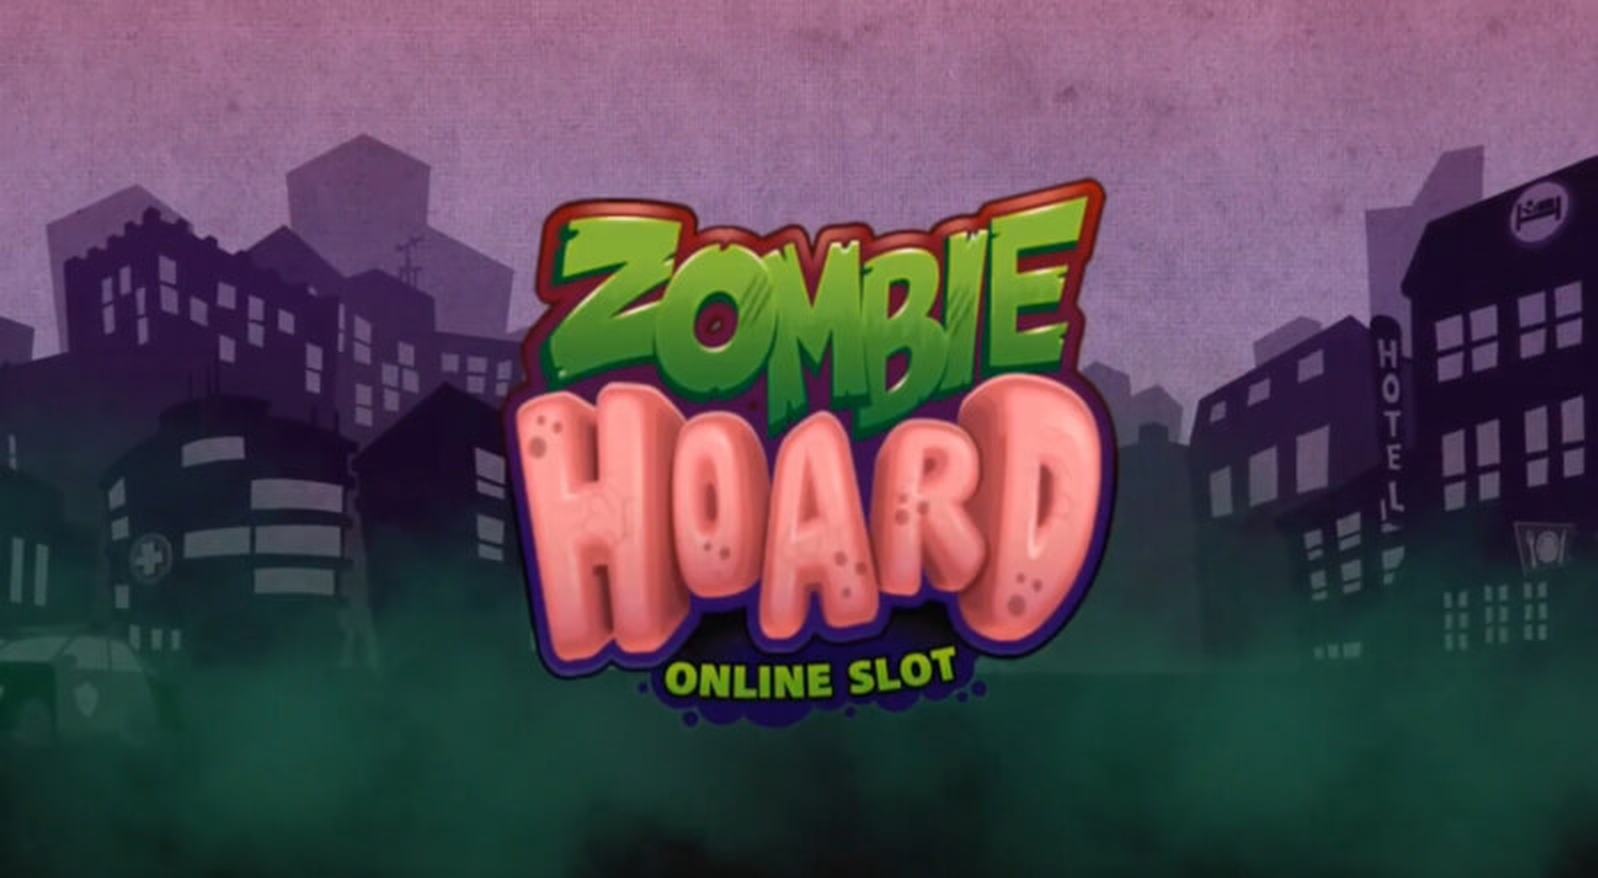 The Zombie Hoard Online Slot Demo Game by Slingshot Studios